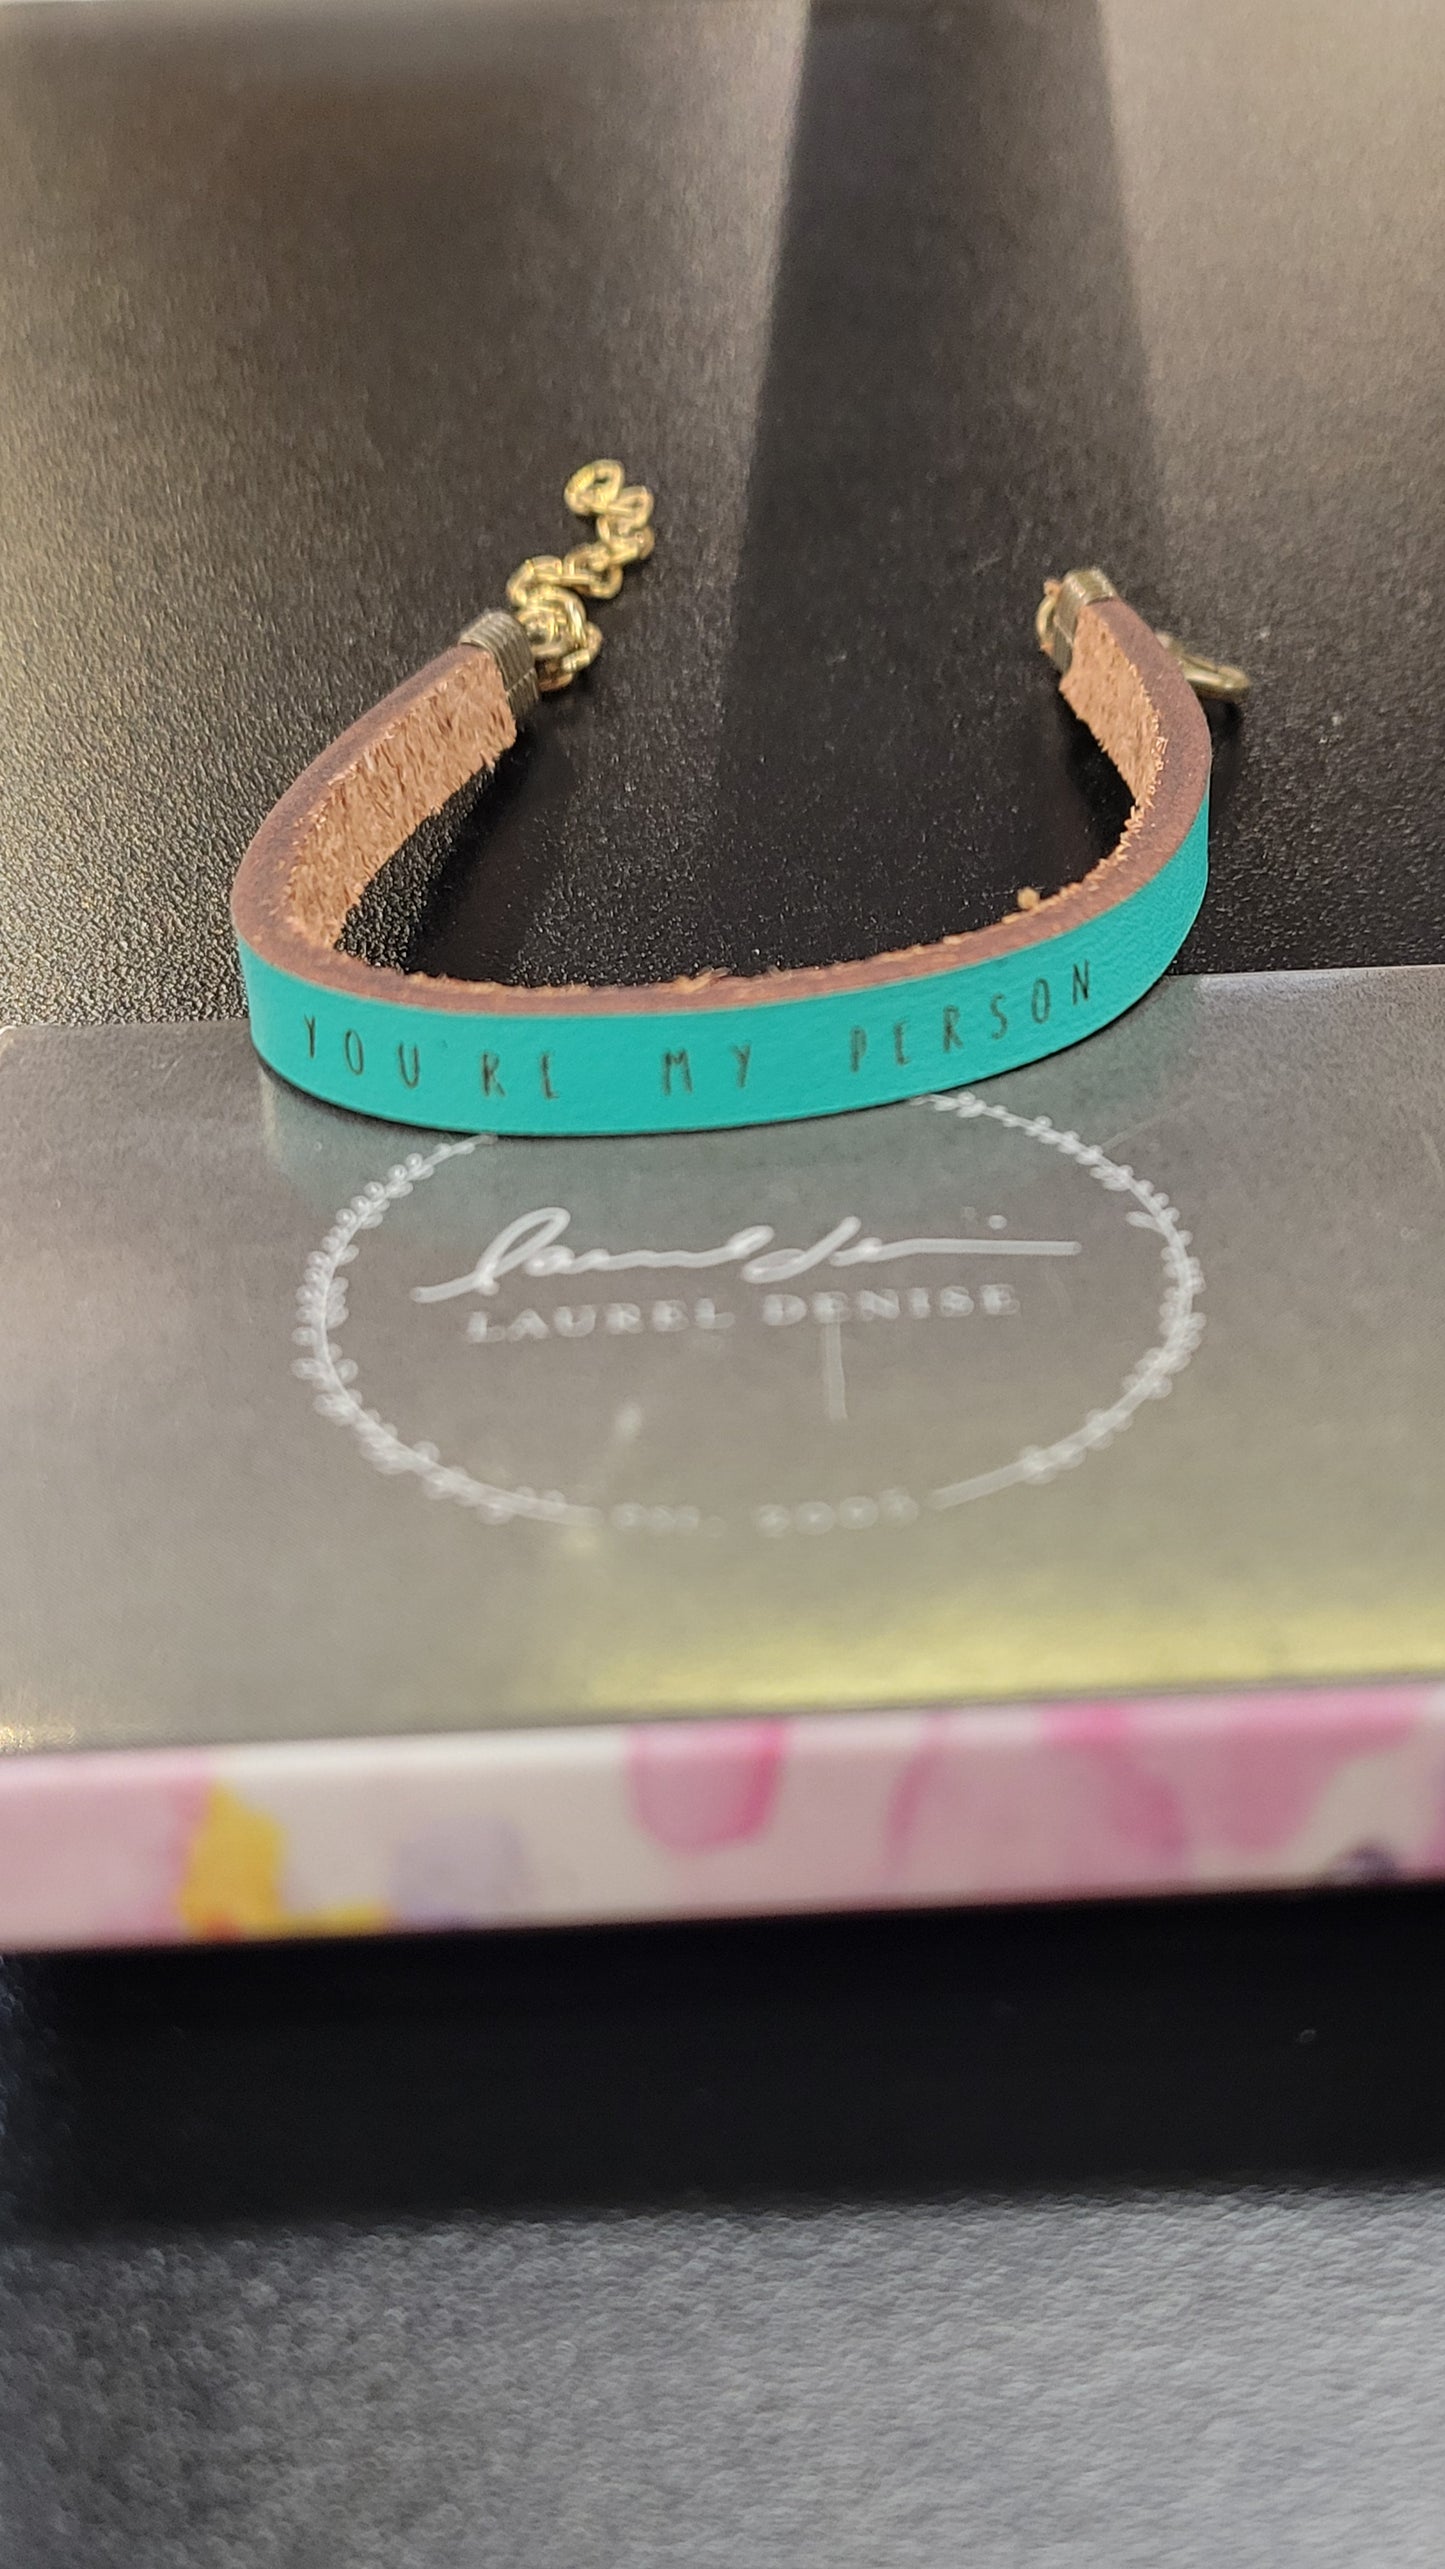 Leather Bracelet - You're My Person - Turquoise Leather